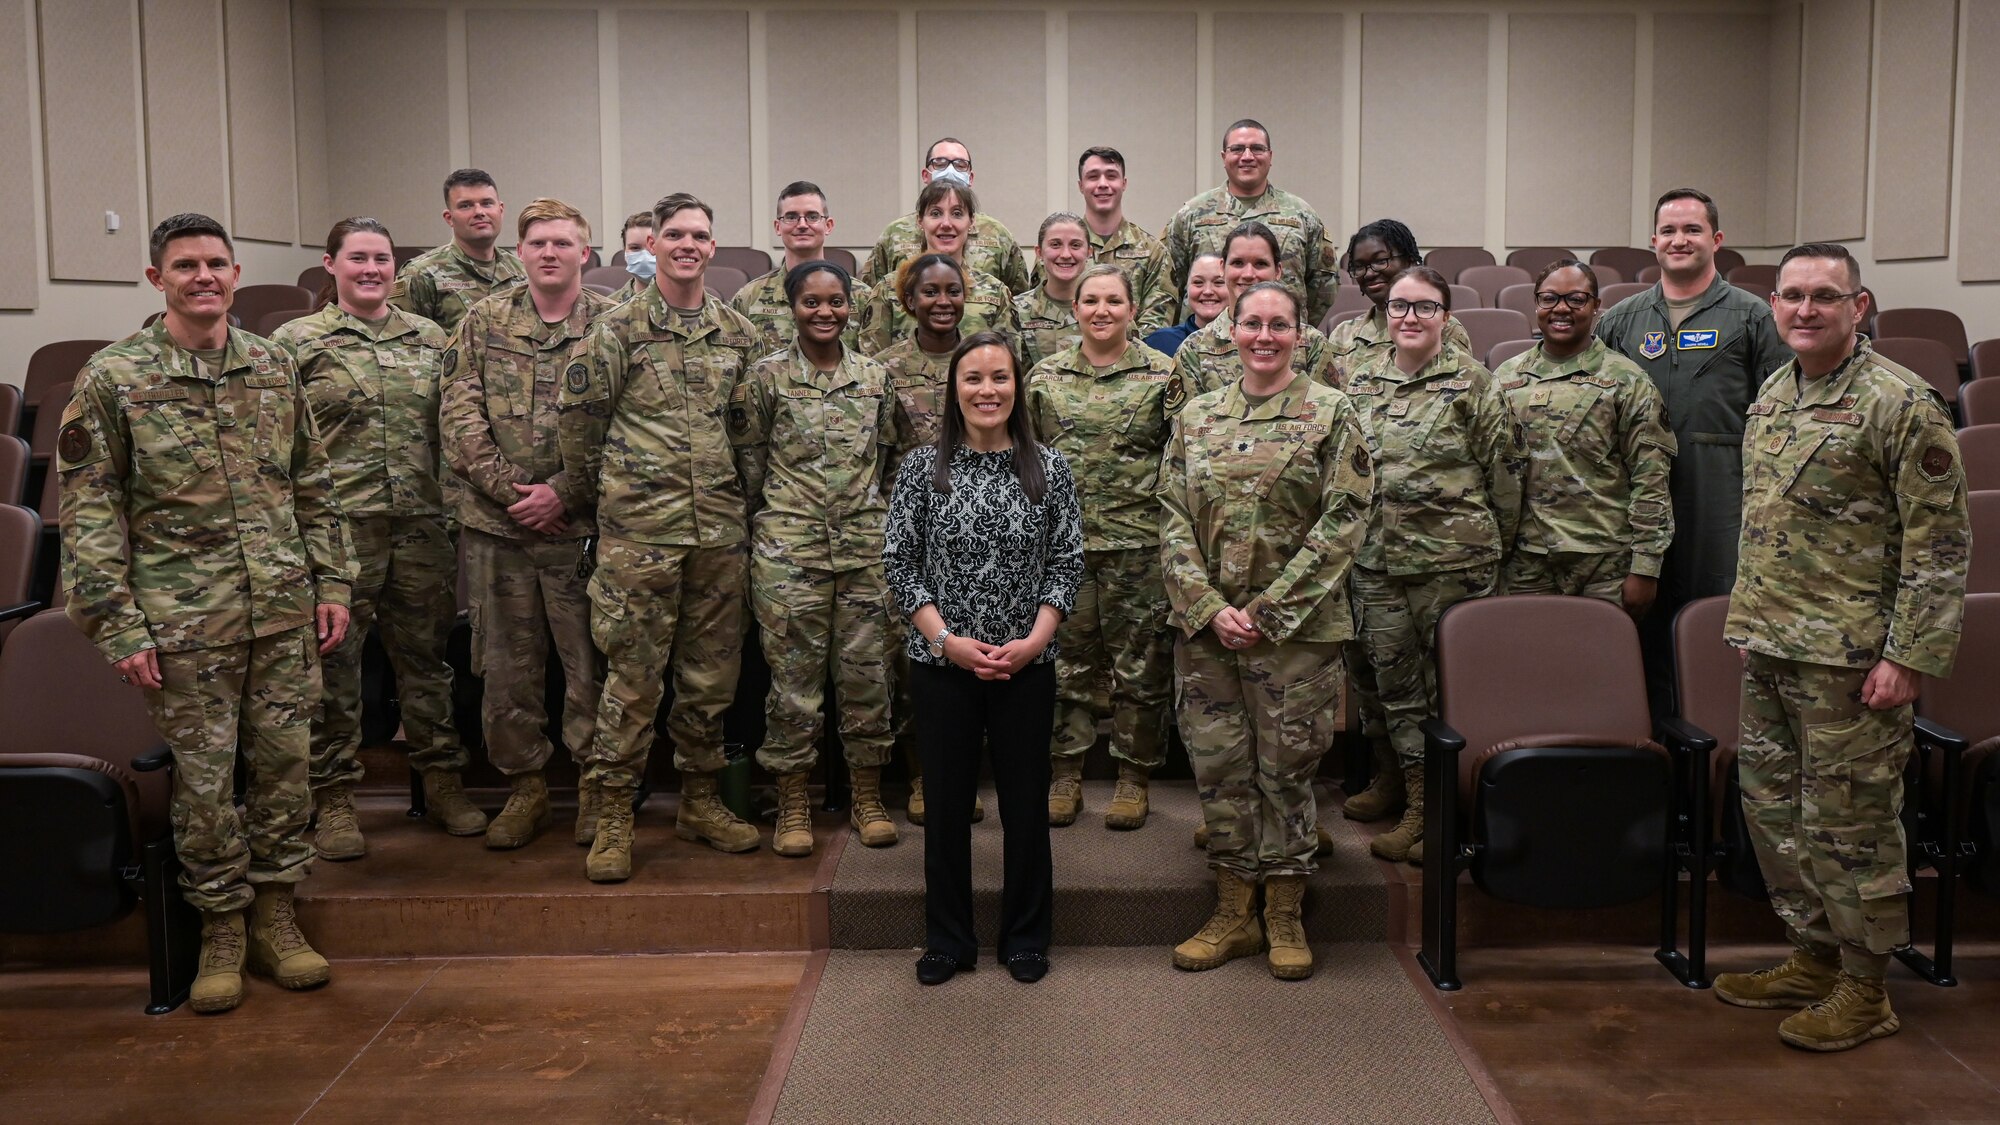 The Honorable Gina Ortiz Jones, Under Secretary of the Air Force, poses for a photo with leaders and Airmen from the 2nd Bomb Wing who innovatevely lead COVID-19 readiness efforts during a visit to Barksdale Air Force Base, Louisiana, April 12, 2022. Jones recognized Airmen who supported efforts during the COVID-19 pandemic. (U.S. Air Force photo by Senior Airman Jonathan E. Ramos)